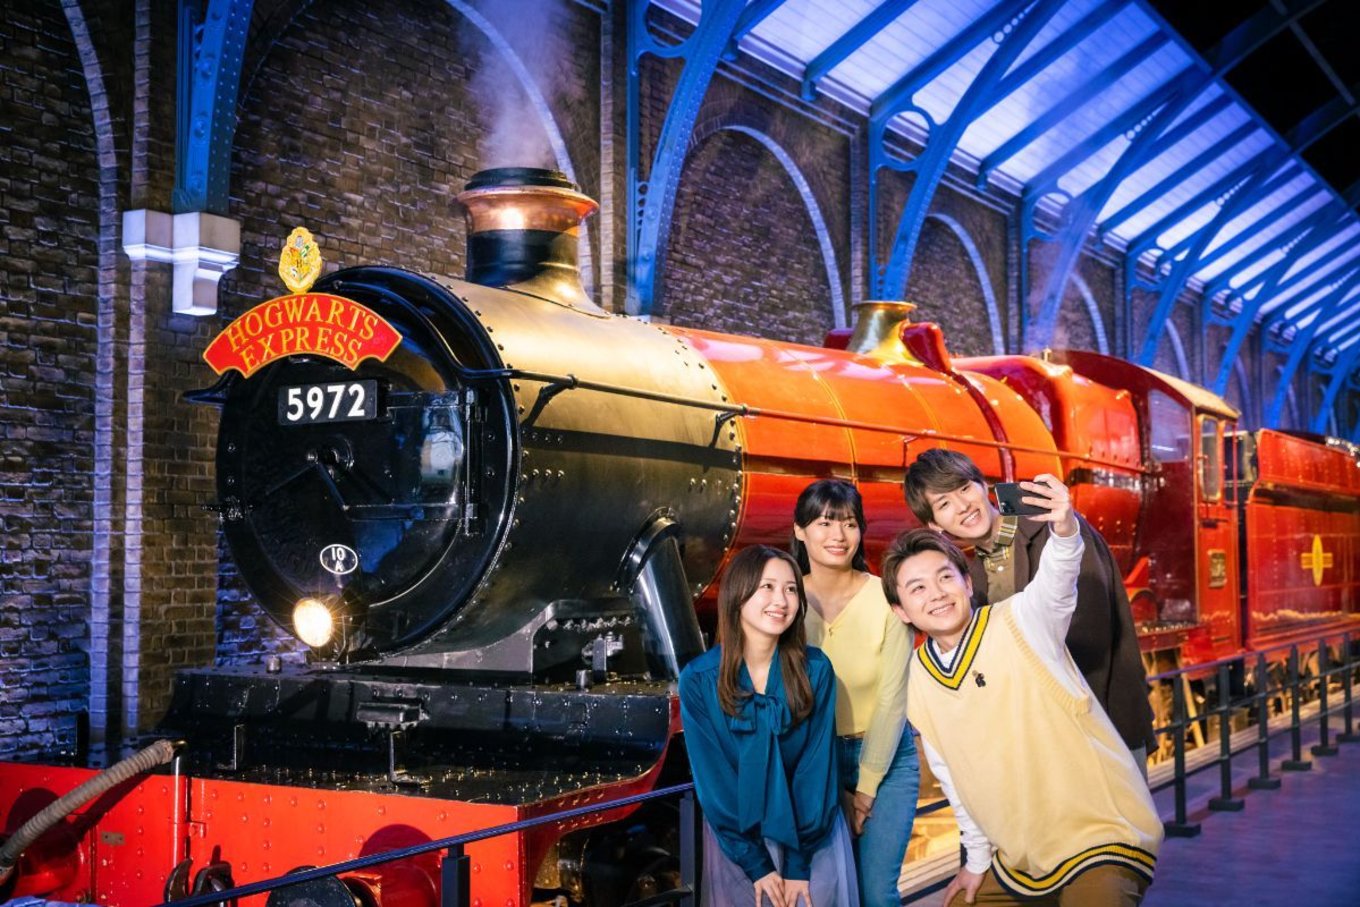 group of people posing in front of hogwarts express